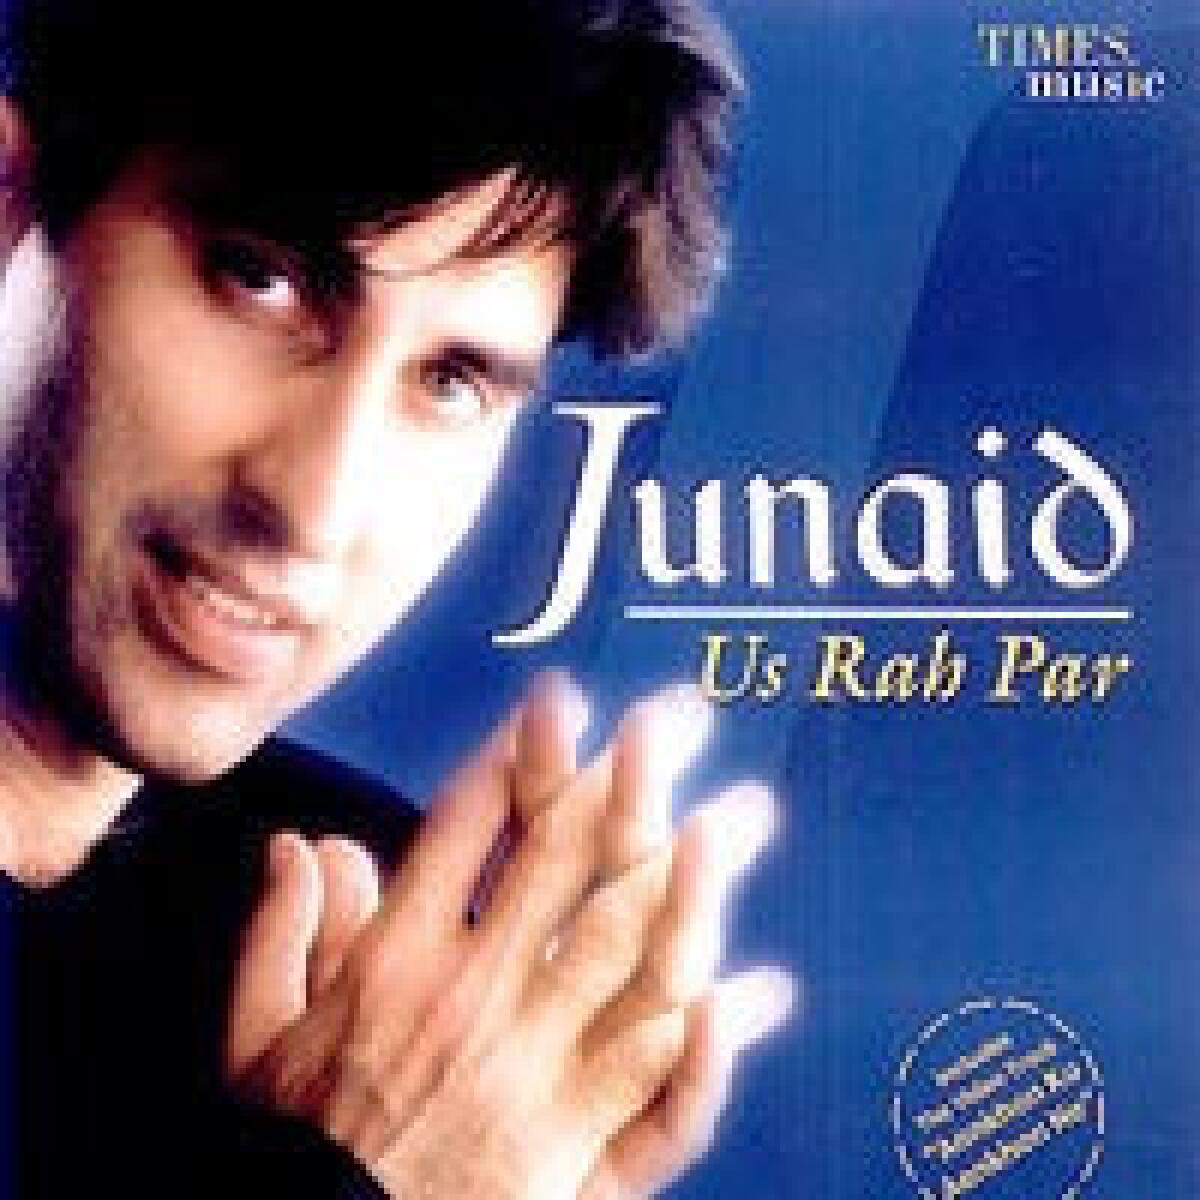 1999 album by Jamshed